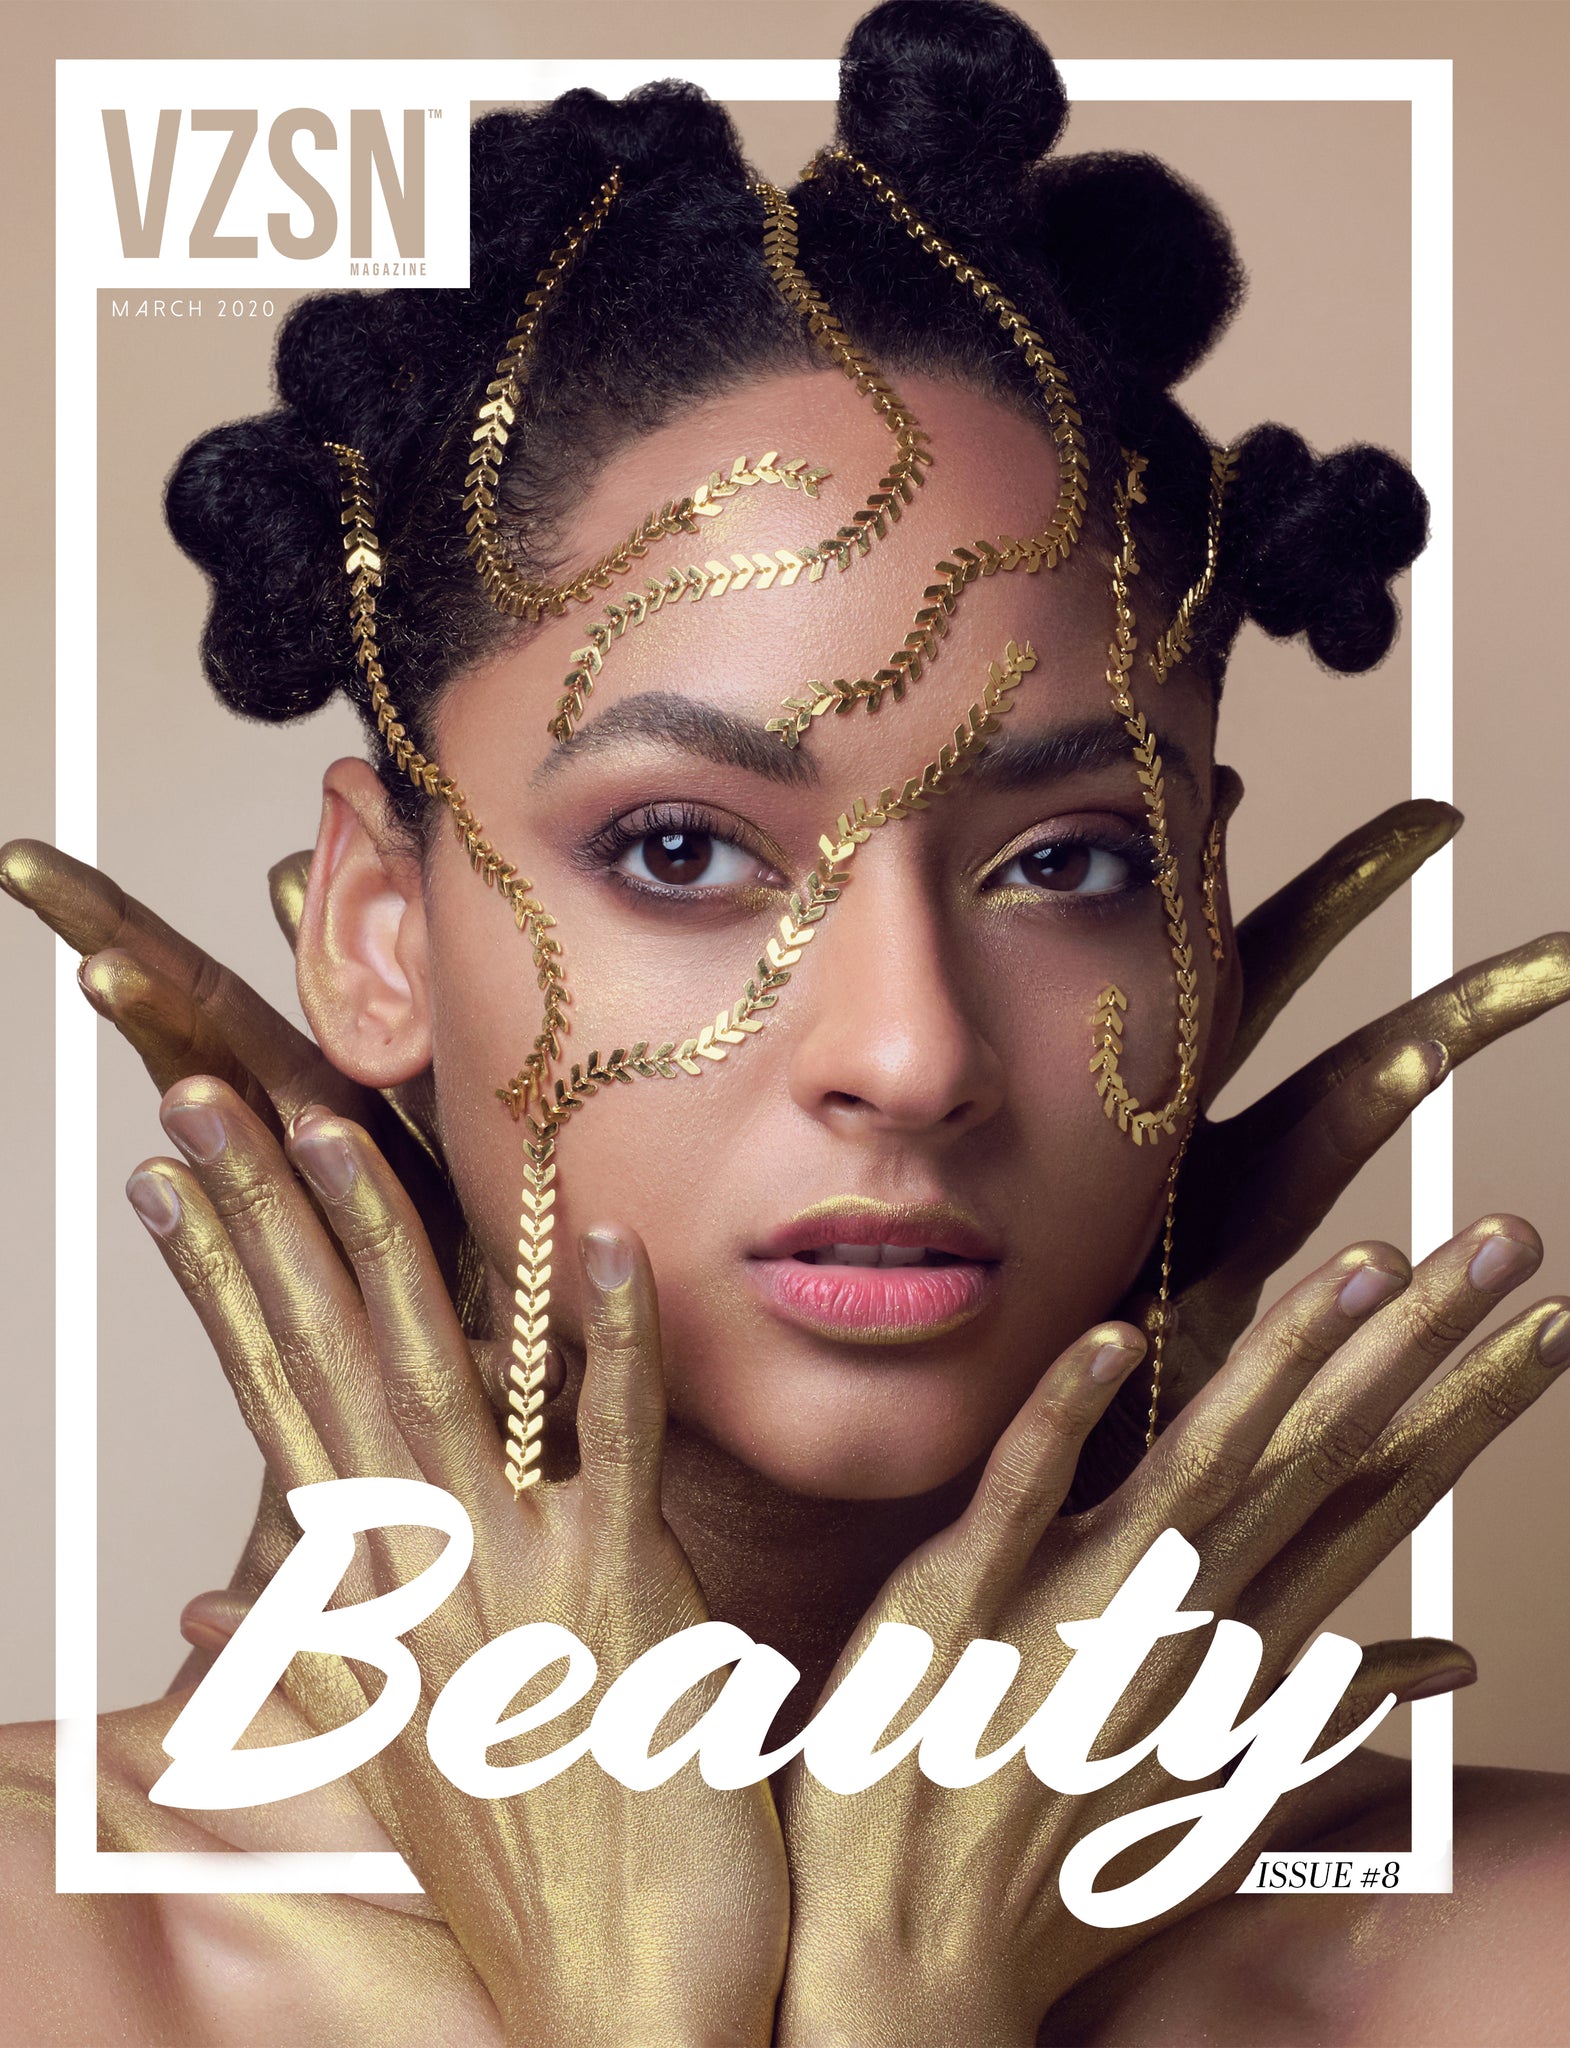 VZSN Magazine | BEAUTY (March 2020) | Vol. 3 Issue 8 (DIGITAL ONLY)